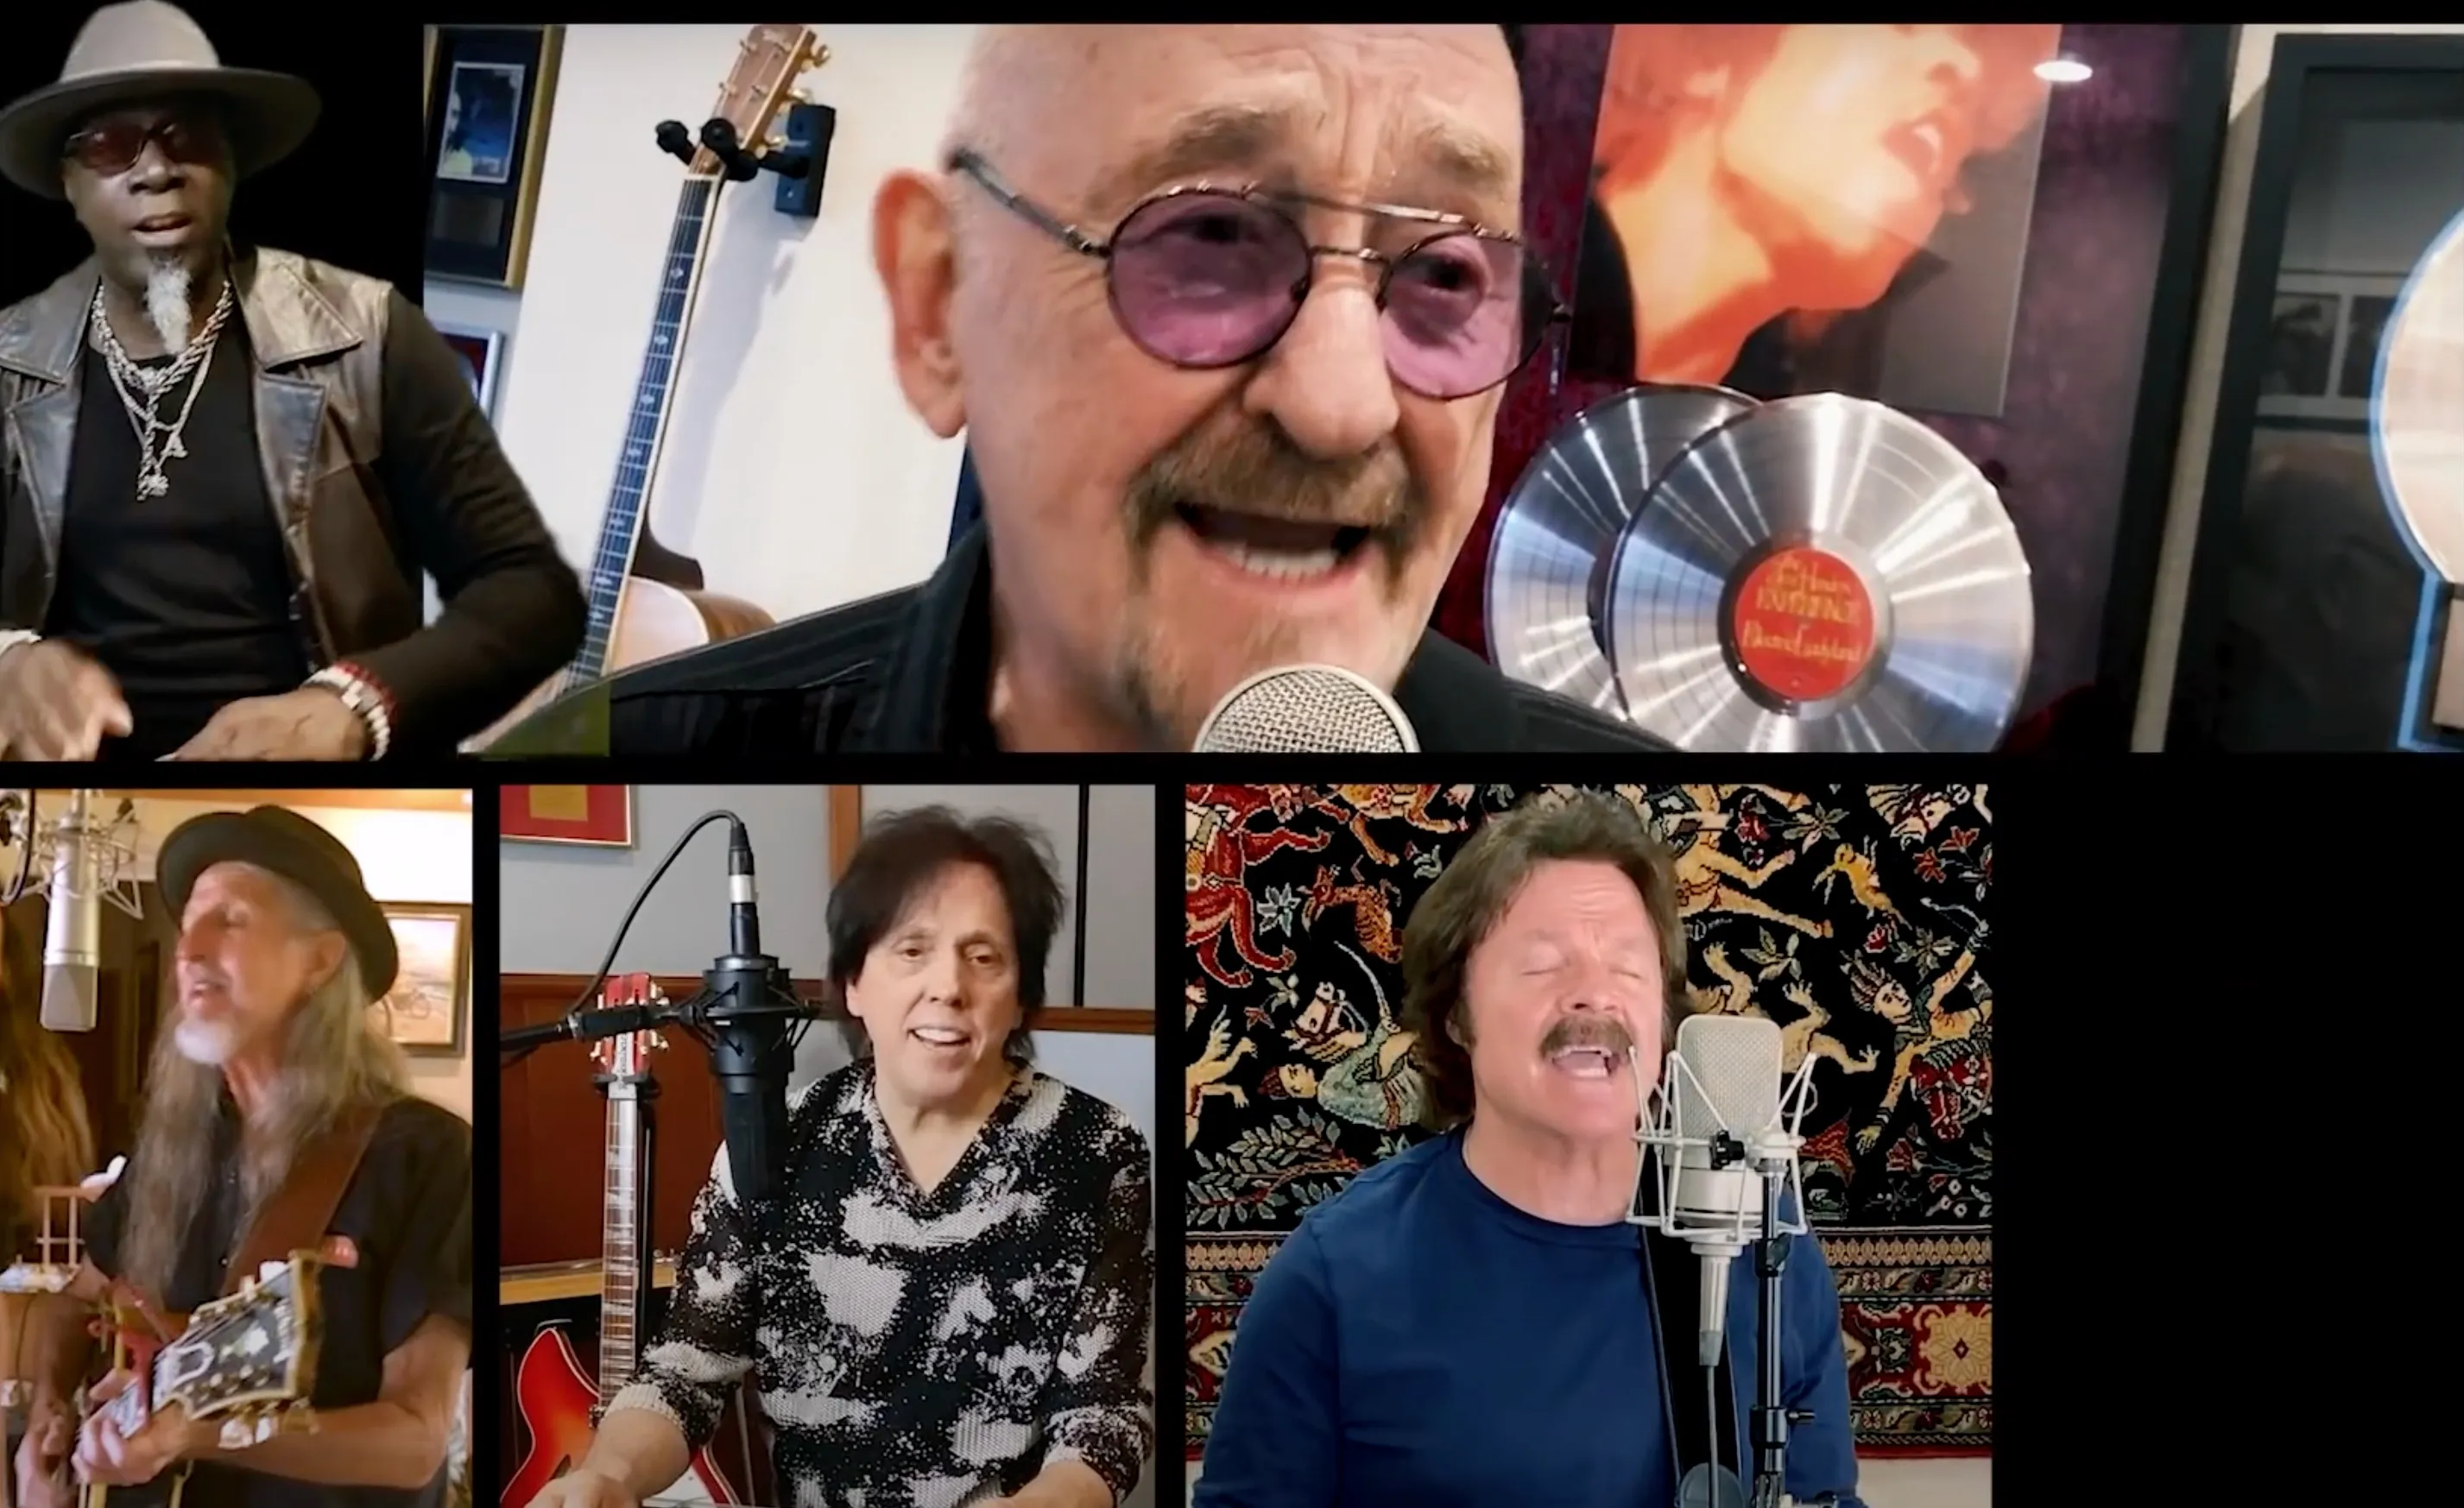 Dave Mason Remakes His Classic “Feelin’ Alright” With A Rock & Roll Hall Of Fame Supergroup